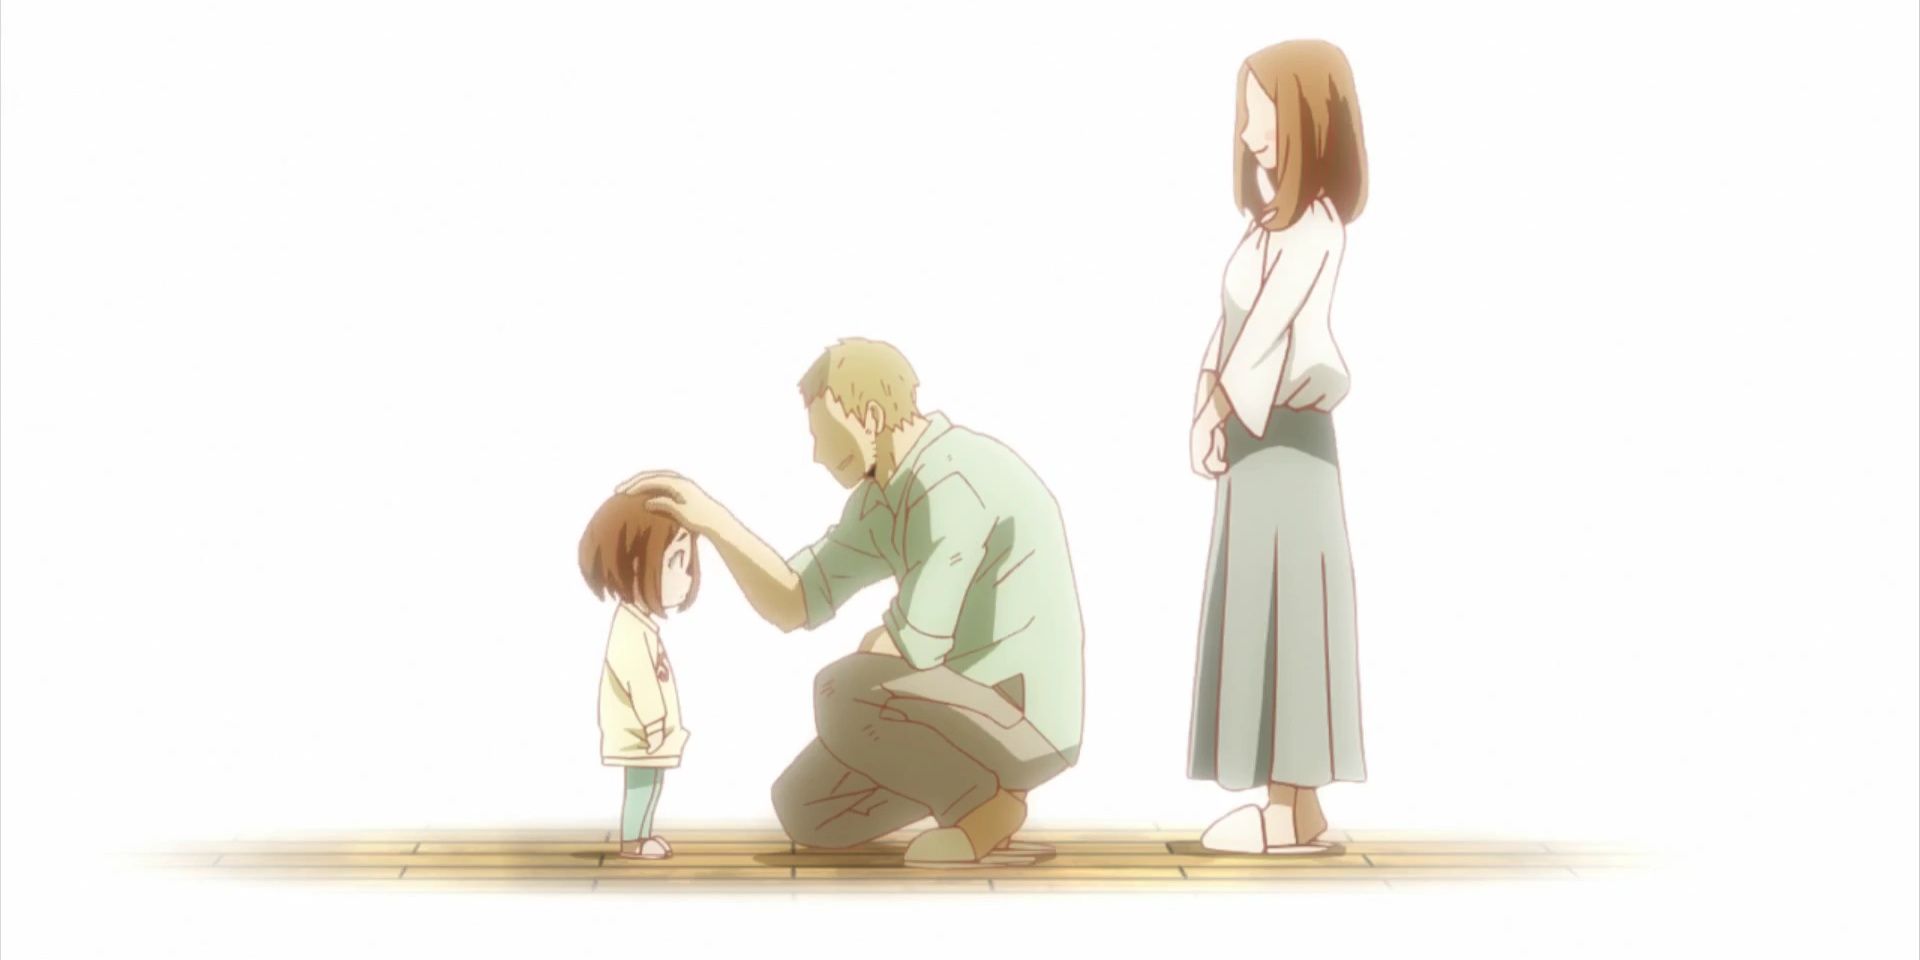 Ochaco receiving a pat on the head from her father